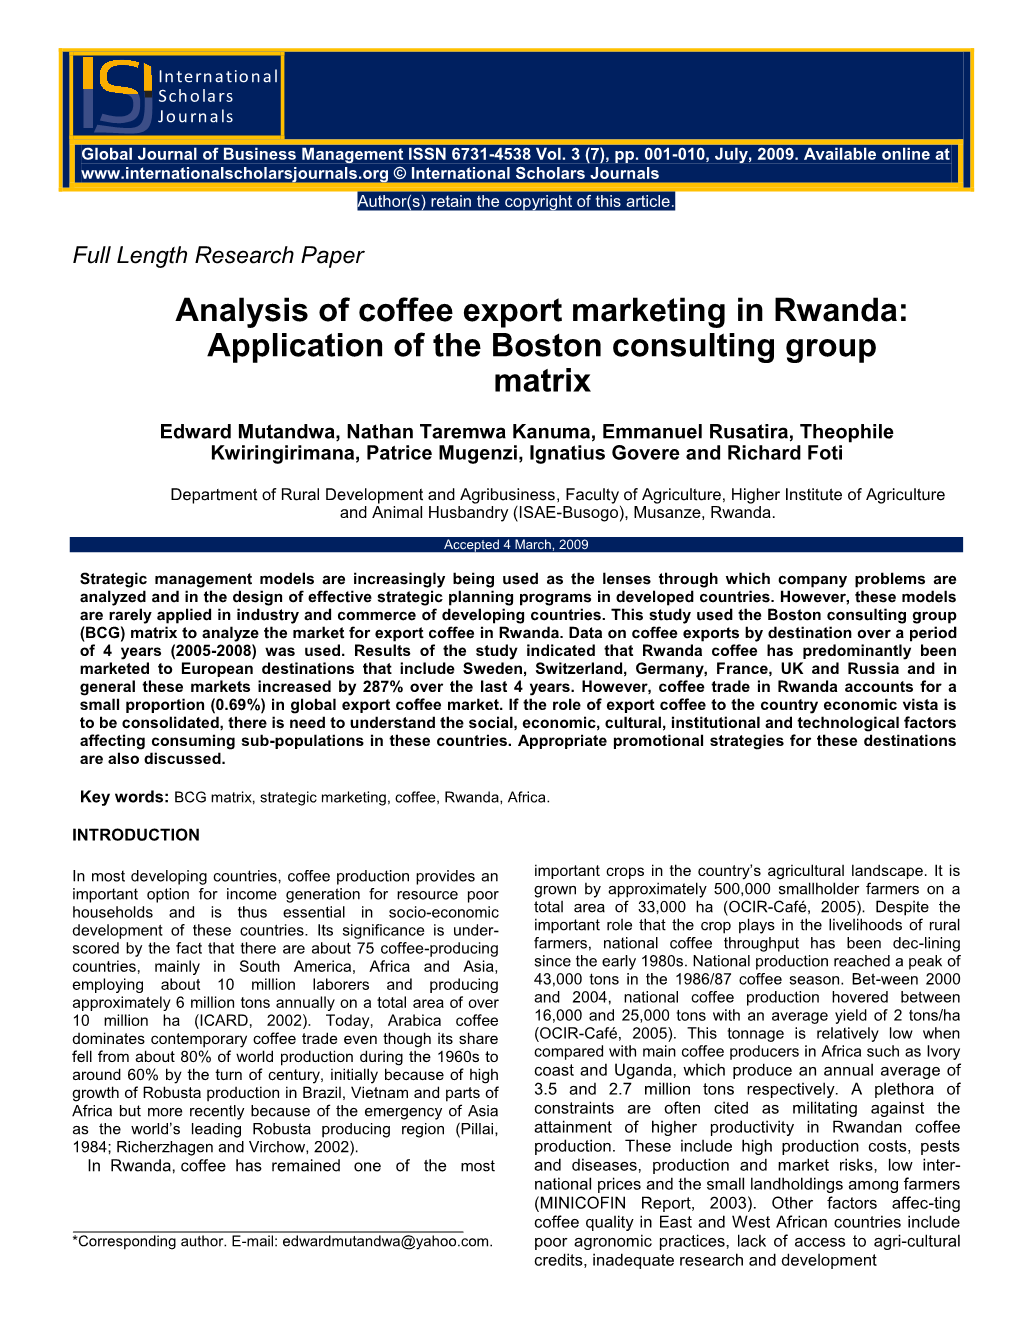 Analysis of Coffee Export Marketing in Rwanda: Application of the Boston Consulting Group Matrix